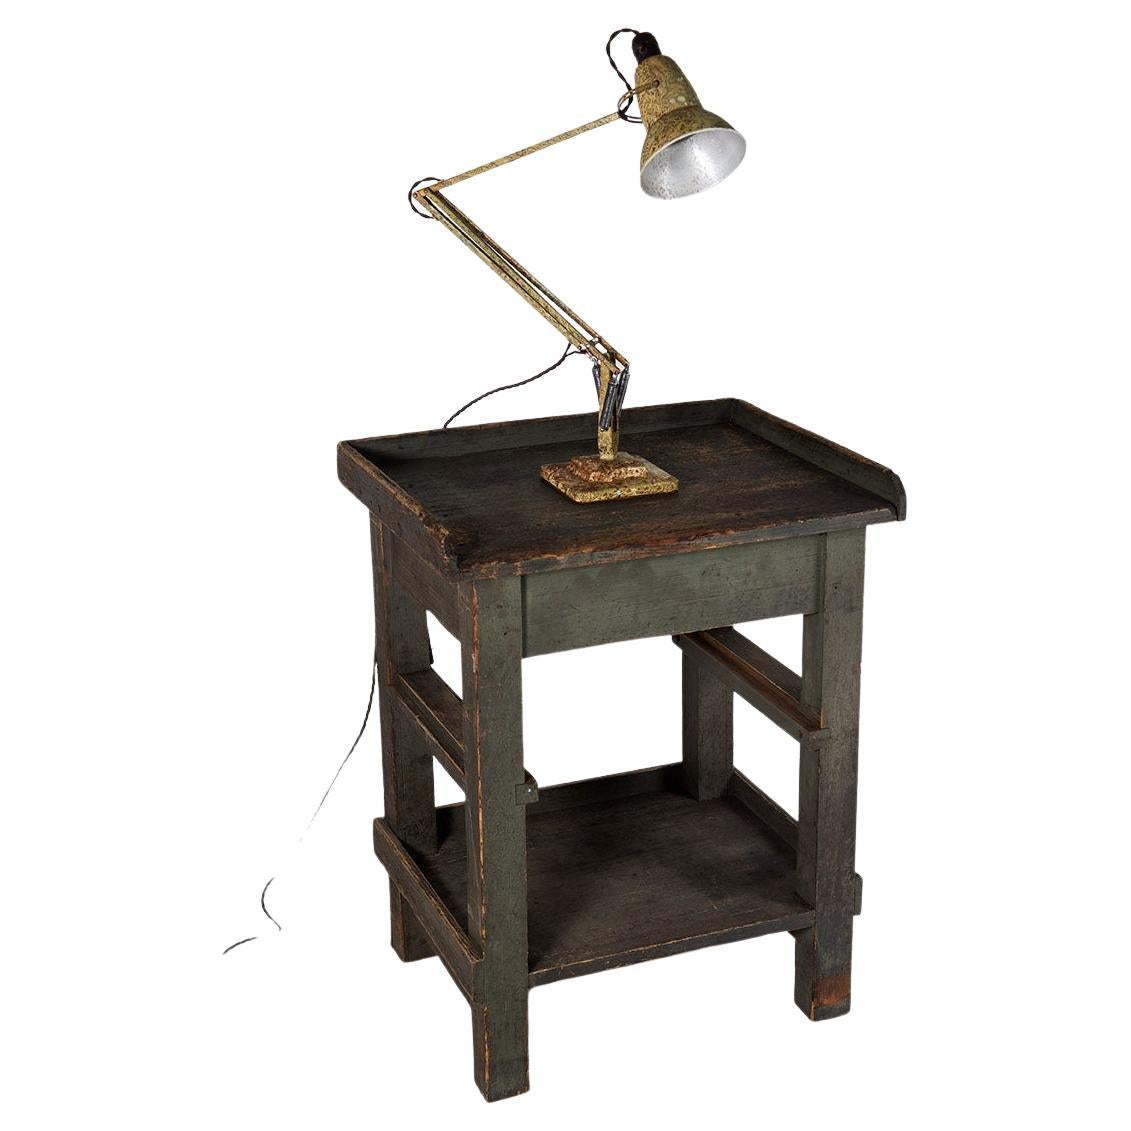 Original Early Herbert Terry Anglepoise Lamp 1227 Desk Lamp Industrial Lamp For Sale